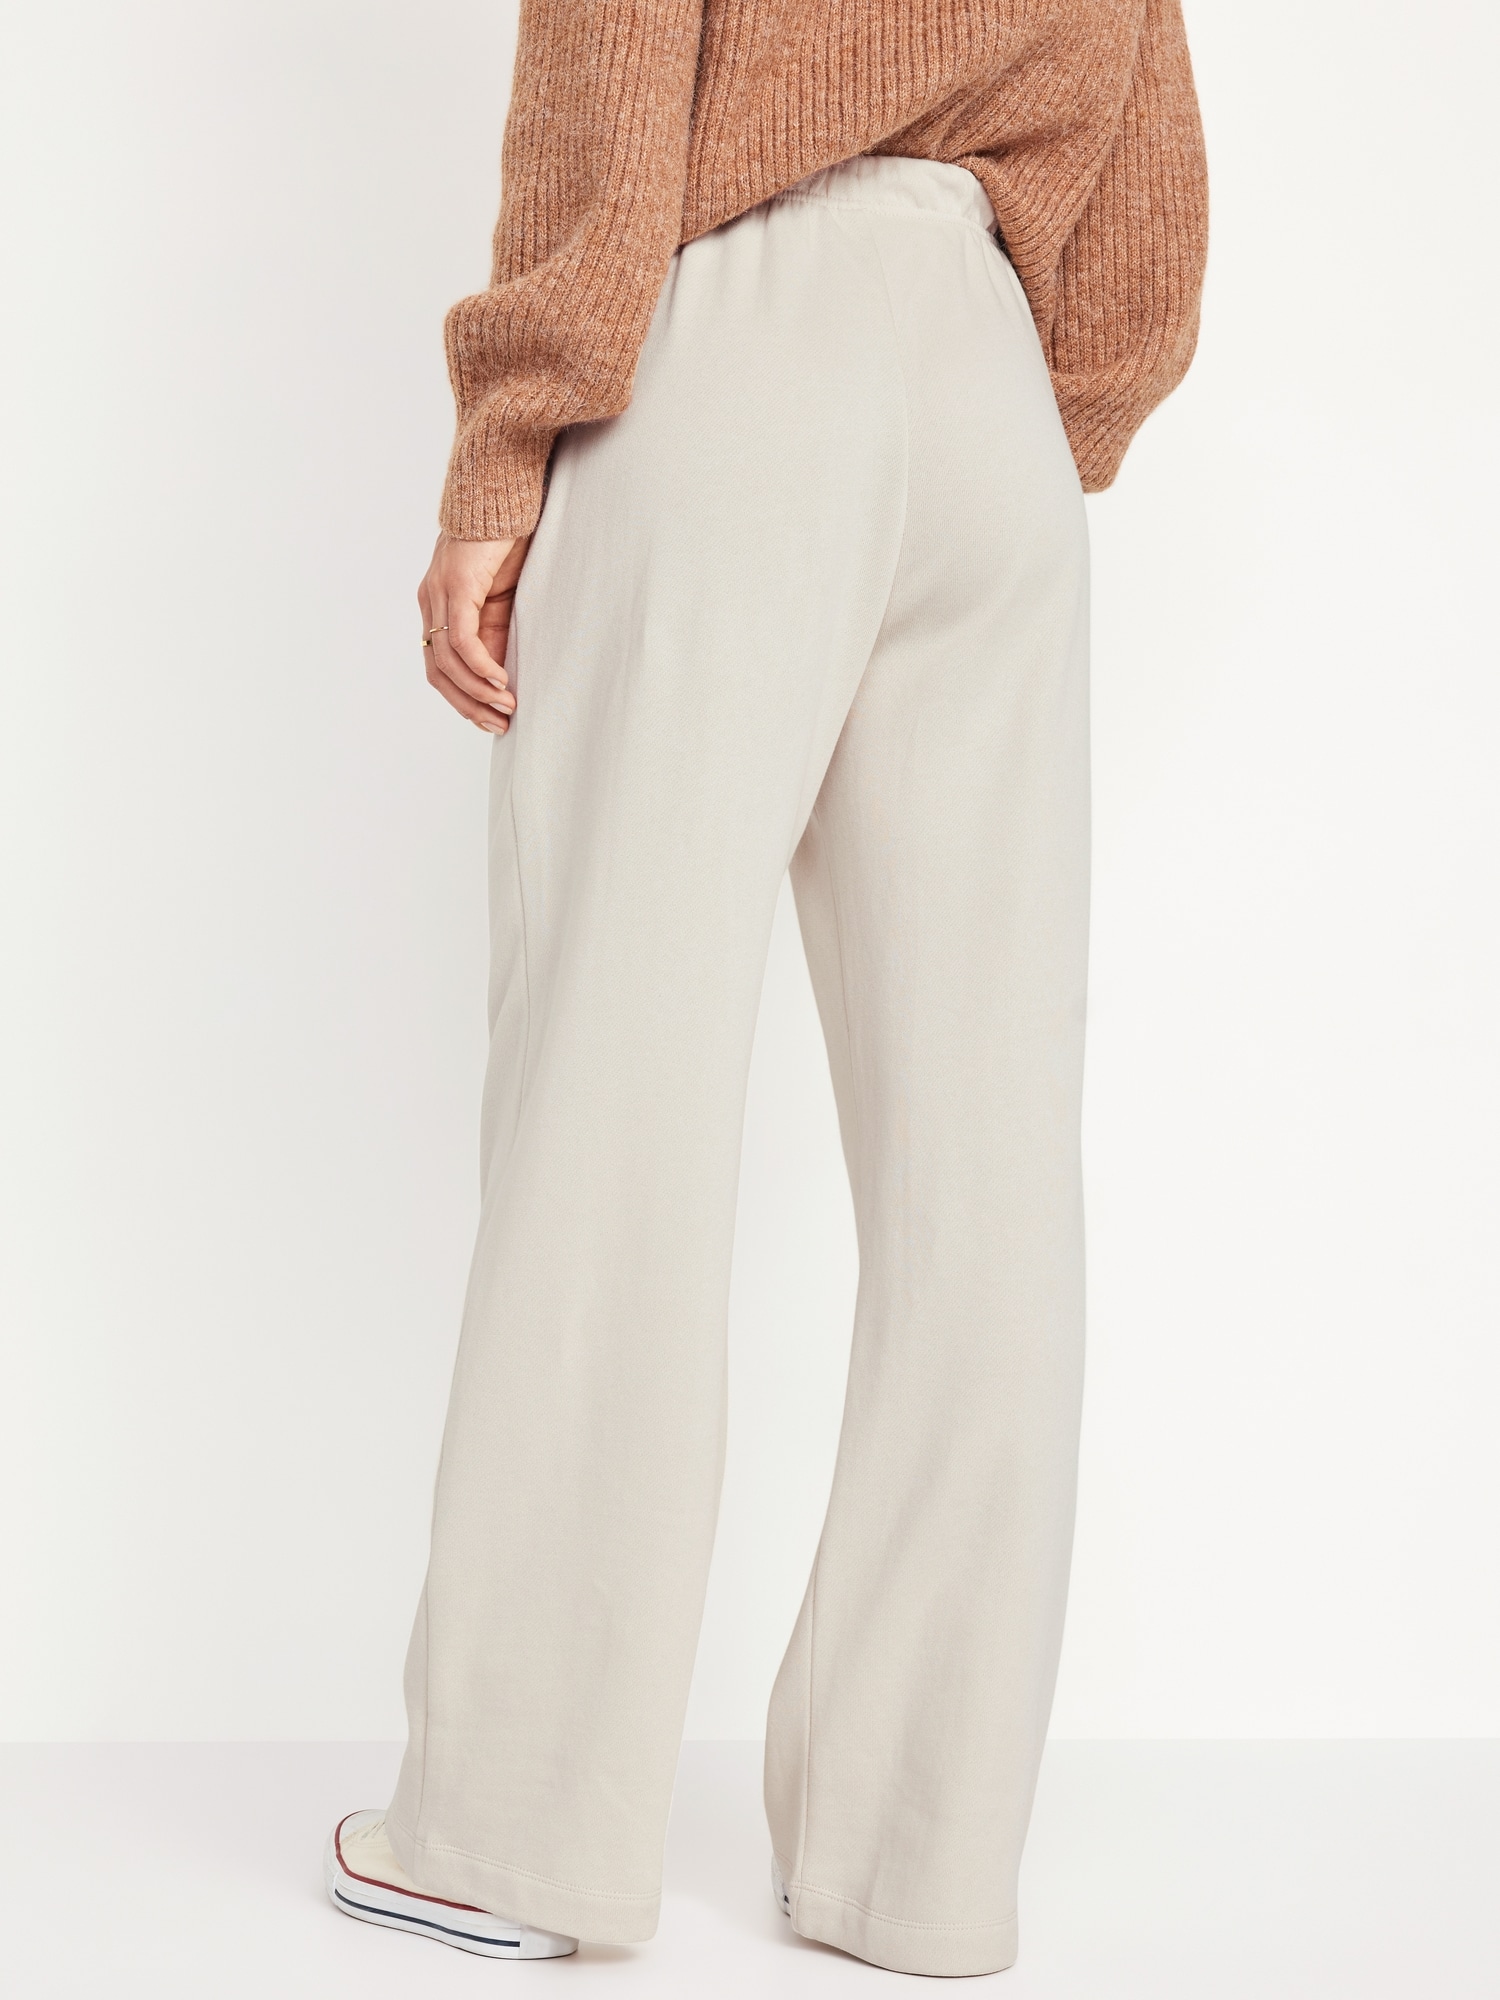 Extra High-Waisted Vintage Sweatpants for Old | Navy Women